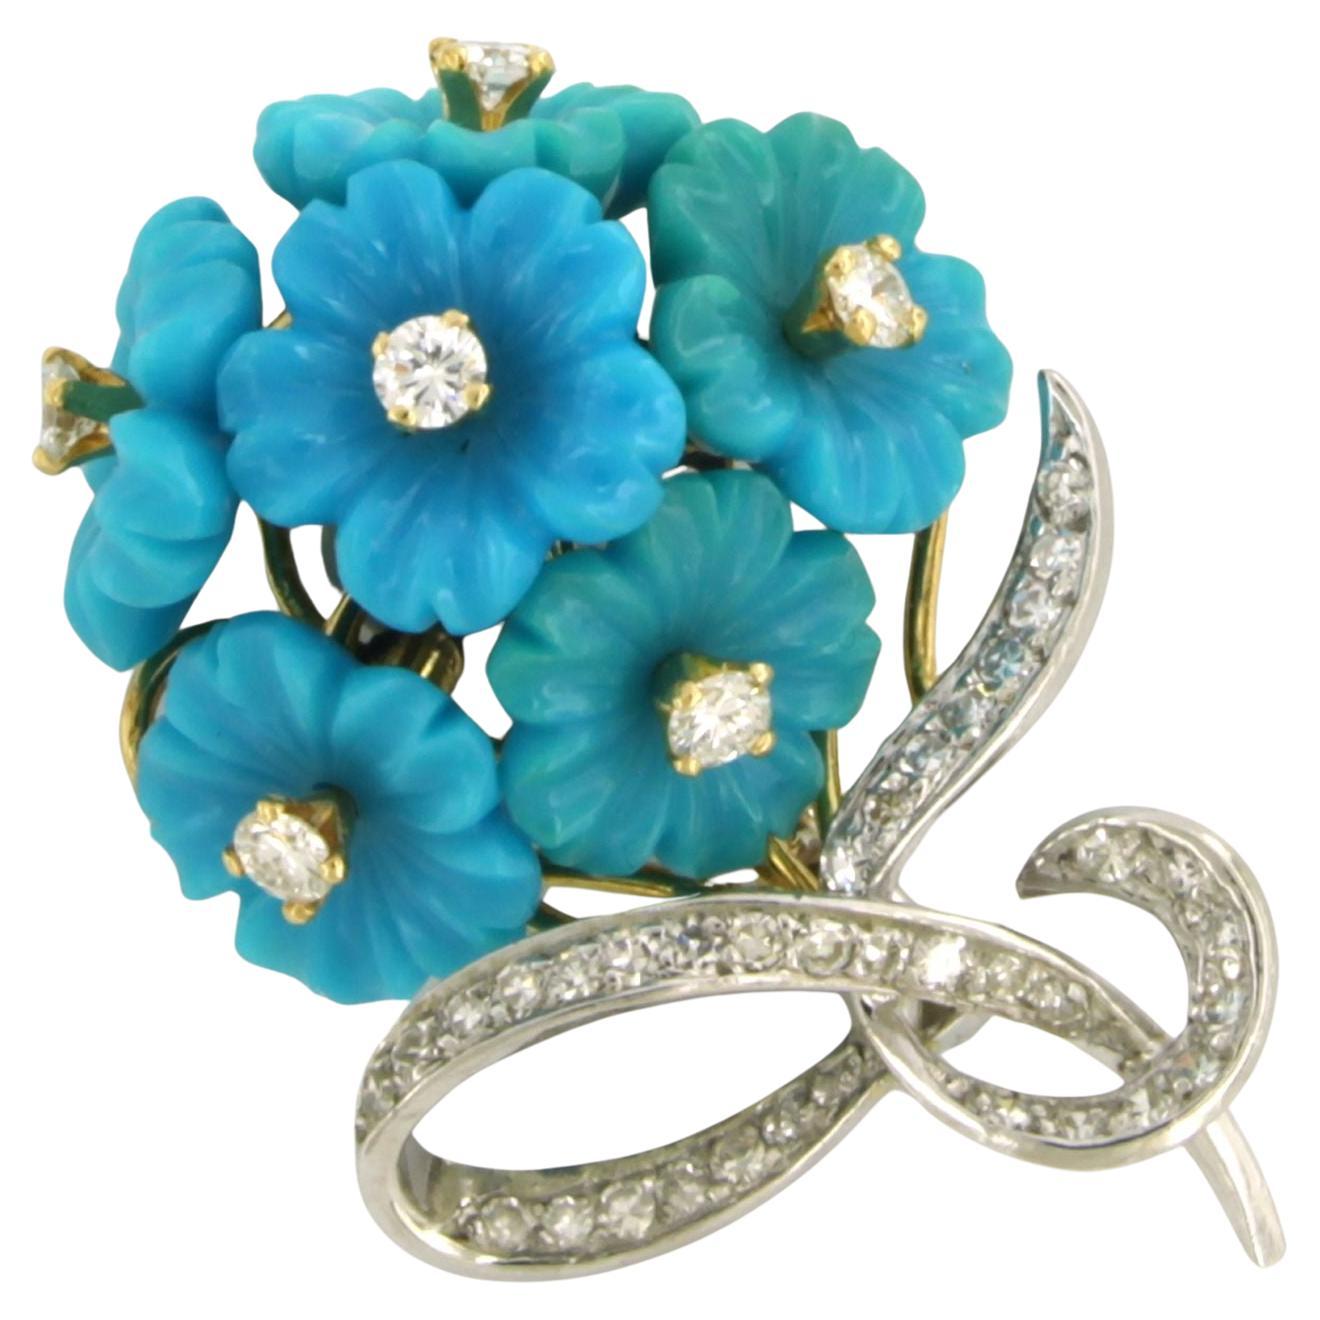 Brooch with turquoise and diamonds 18k yellow gold and platinum